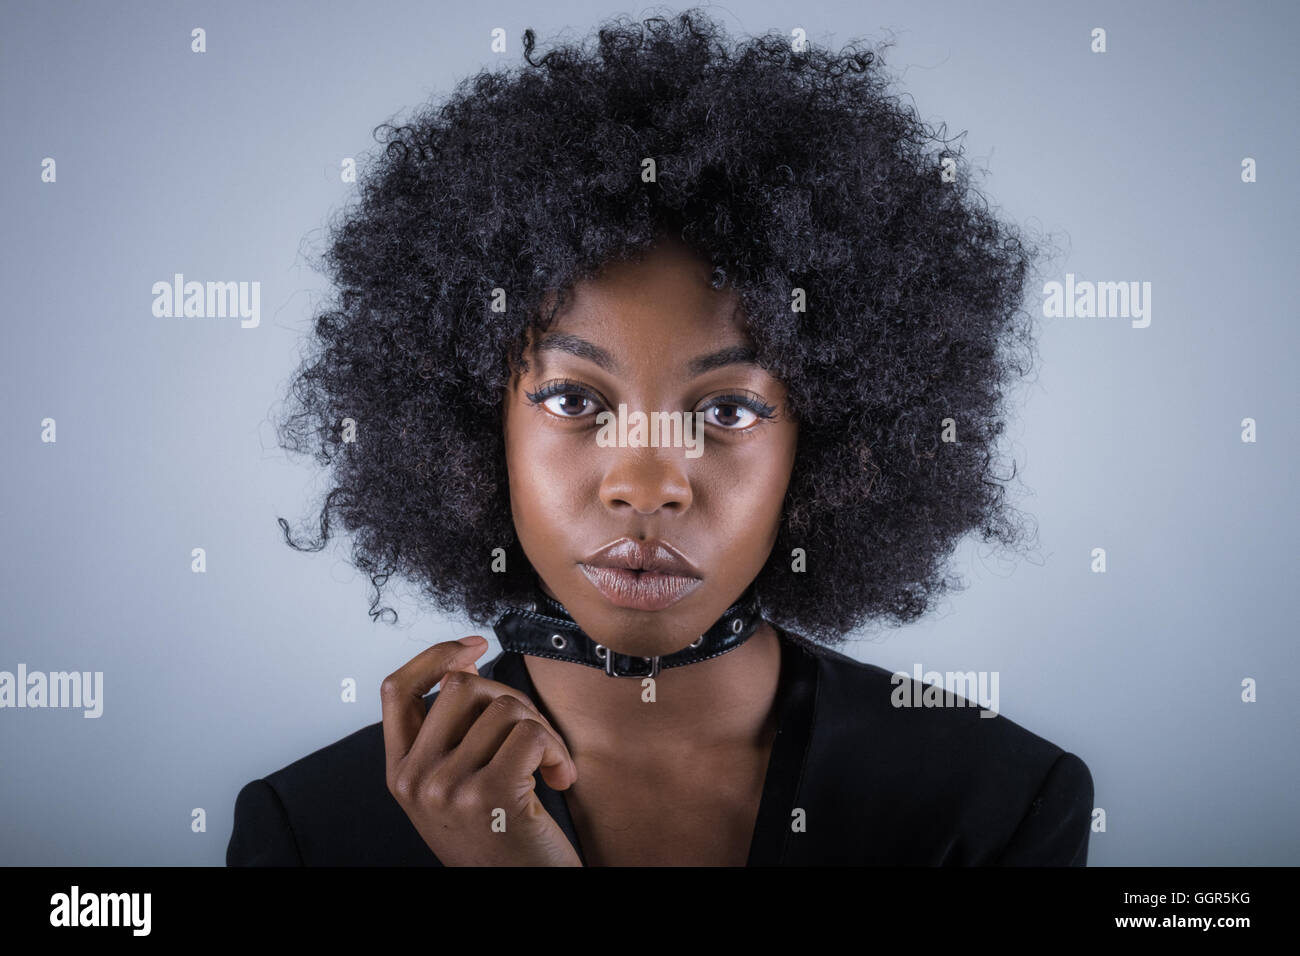 Afro Caribbean woman in her 20s shooting fashion images Stock Photo